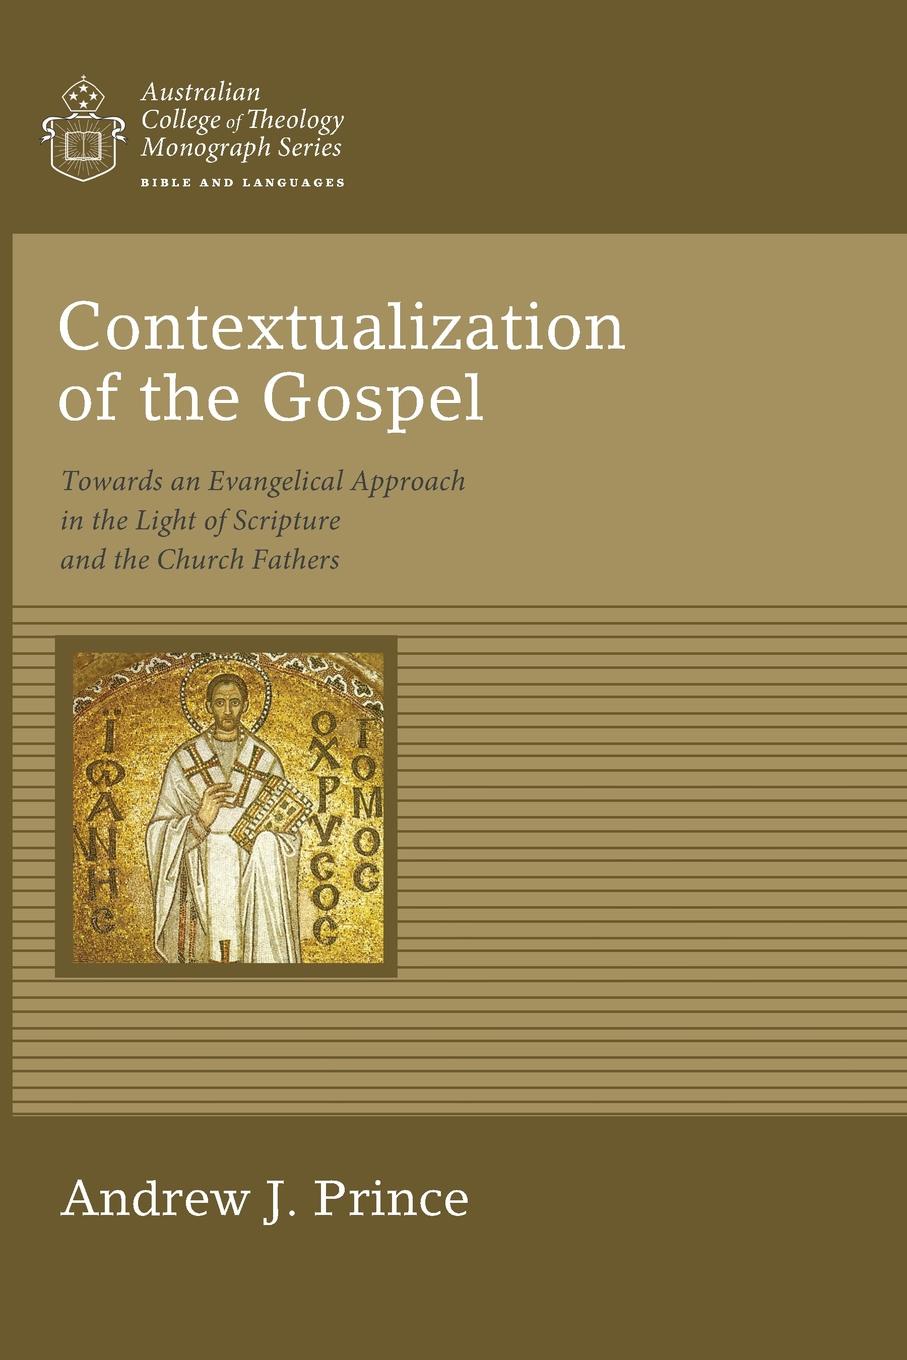 Contextualization of the Gospel. Towards an Evangelical Approach in the Light of Scripture and the Church Fathers